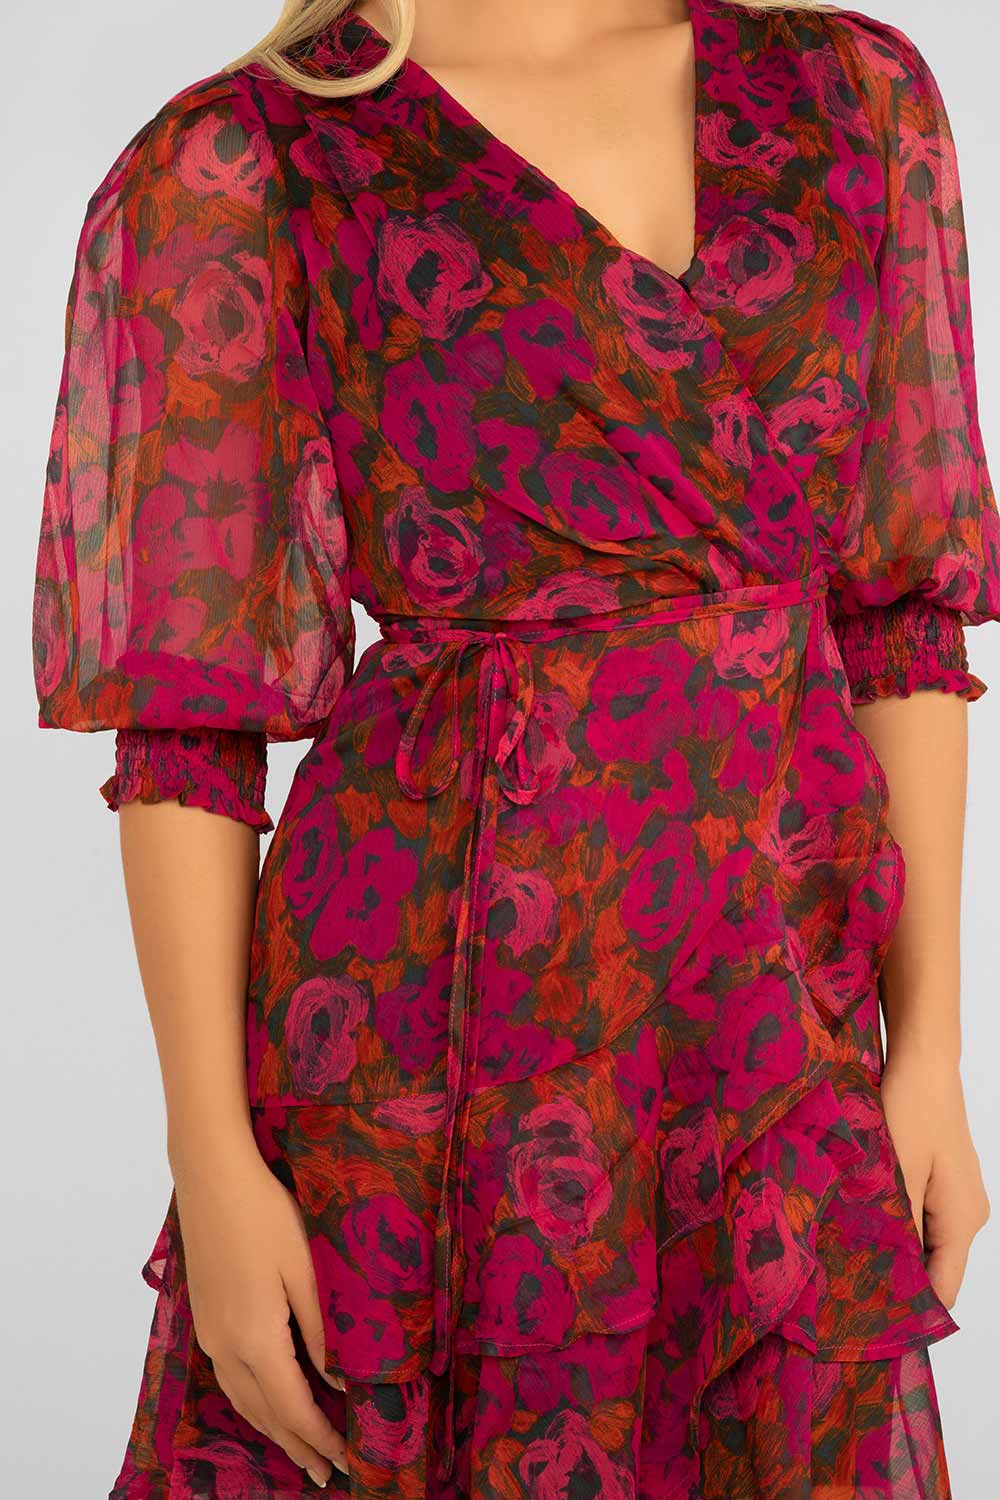 Women's Clothing ESQUALO (F2314531) Floral Wrap Dress in FLORALWILDING